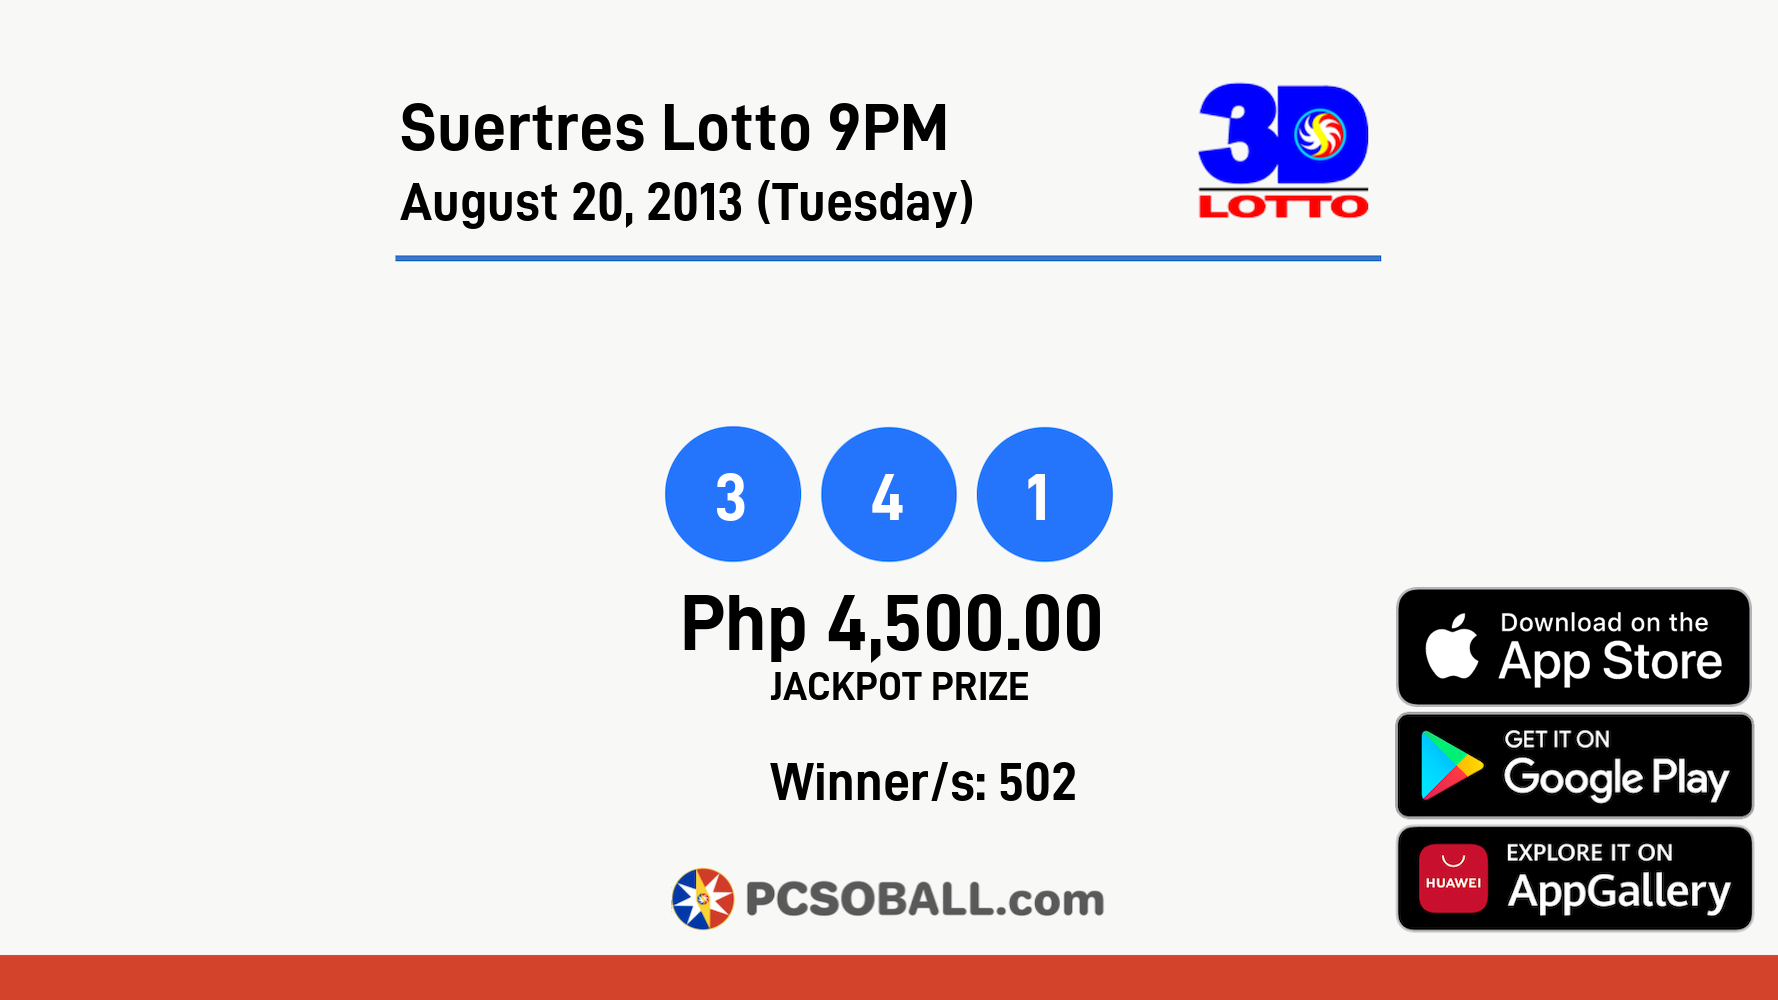 Suertres Lotto 9PM August 20, 2013 (Tuesday) Result